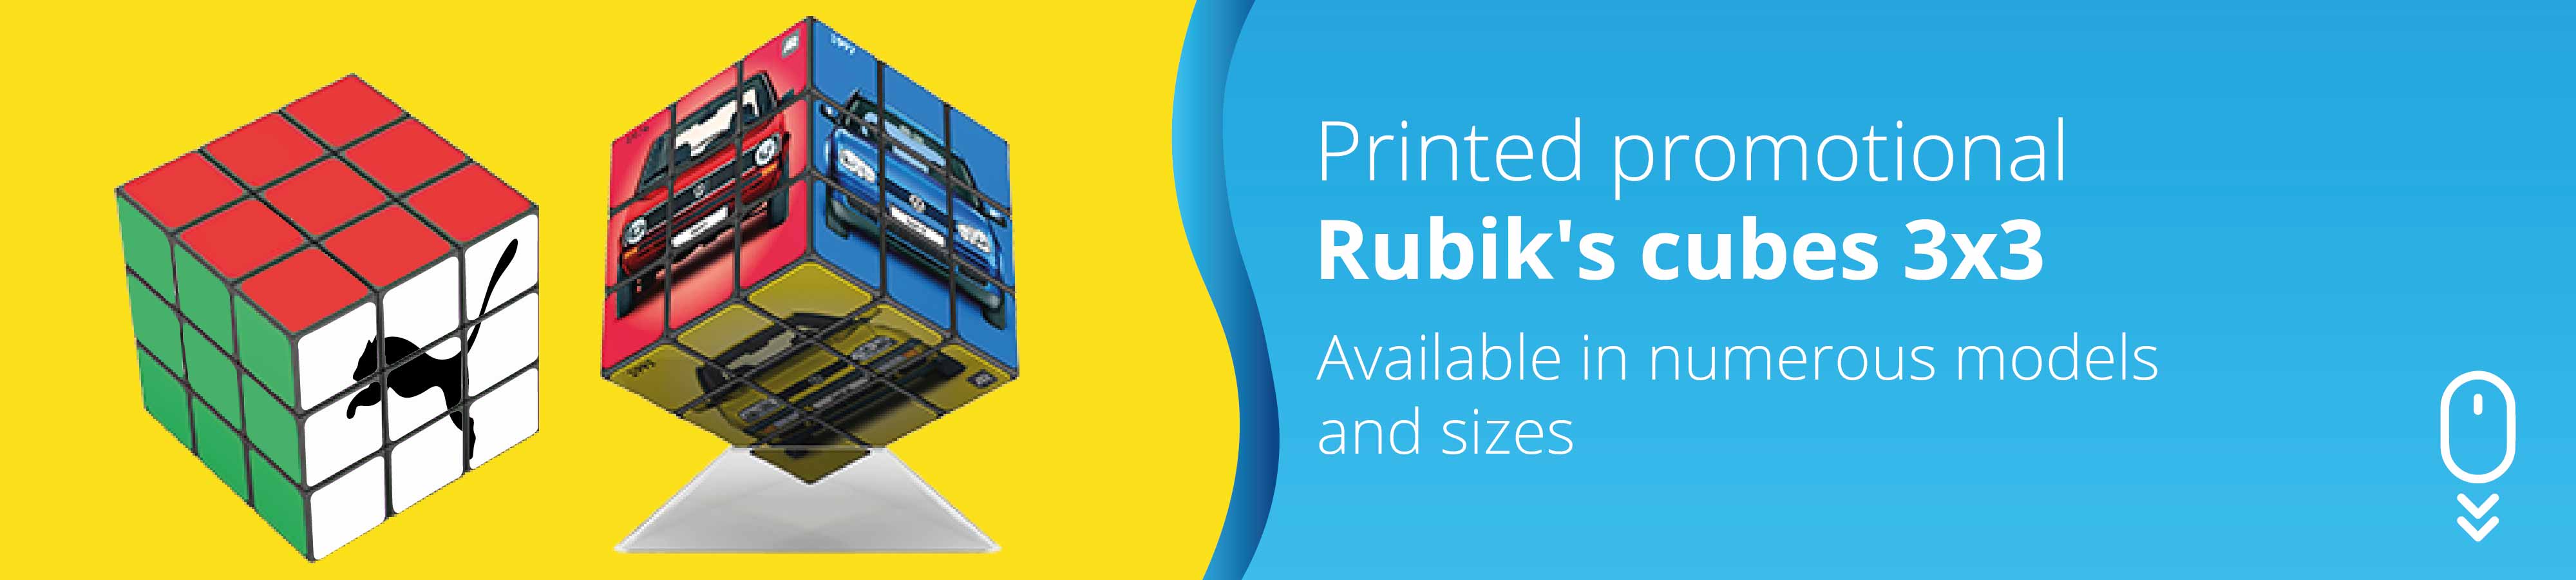 printed-promotional-rubiks-cube-3x3